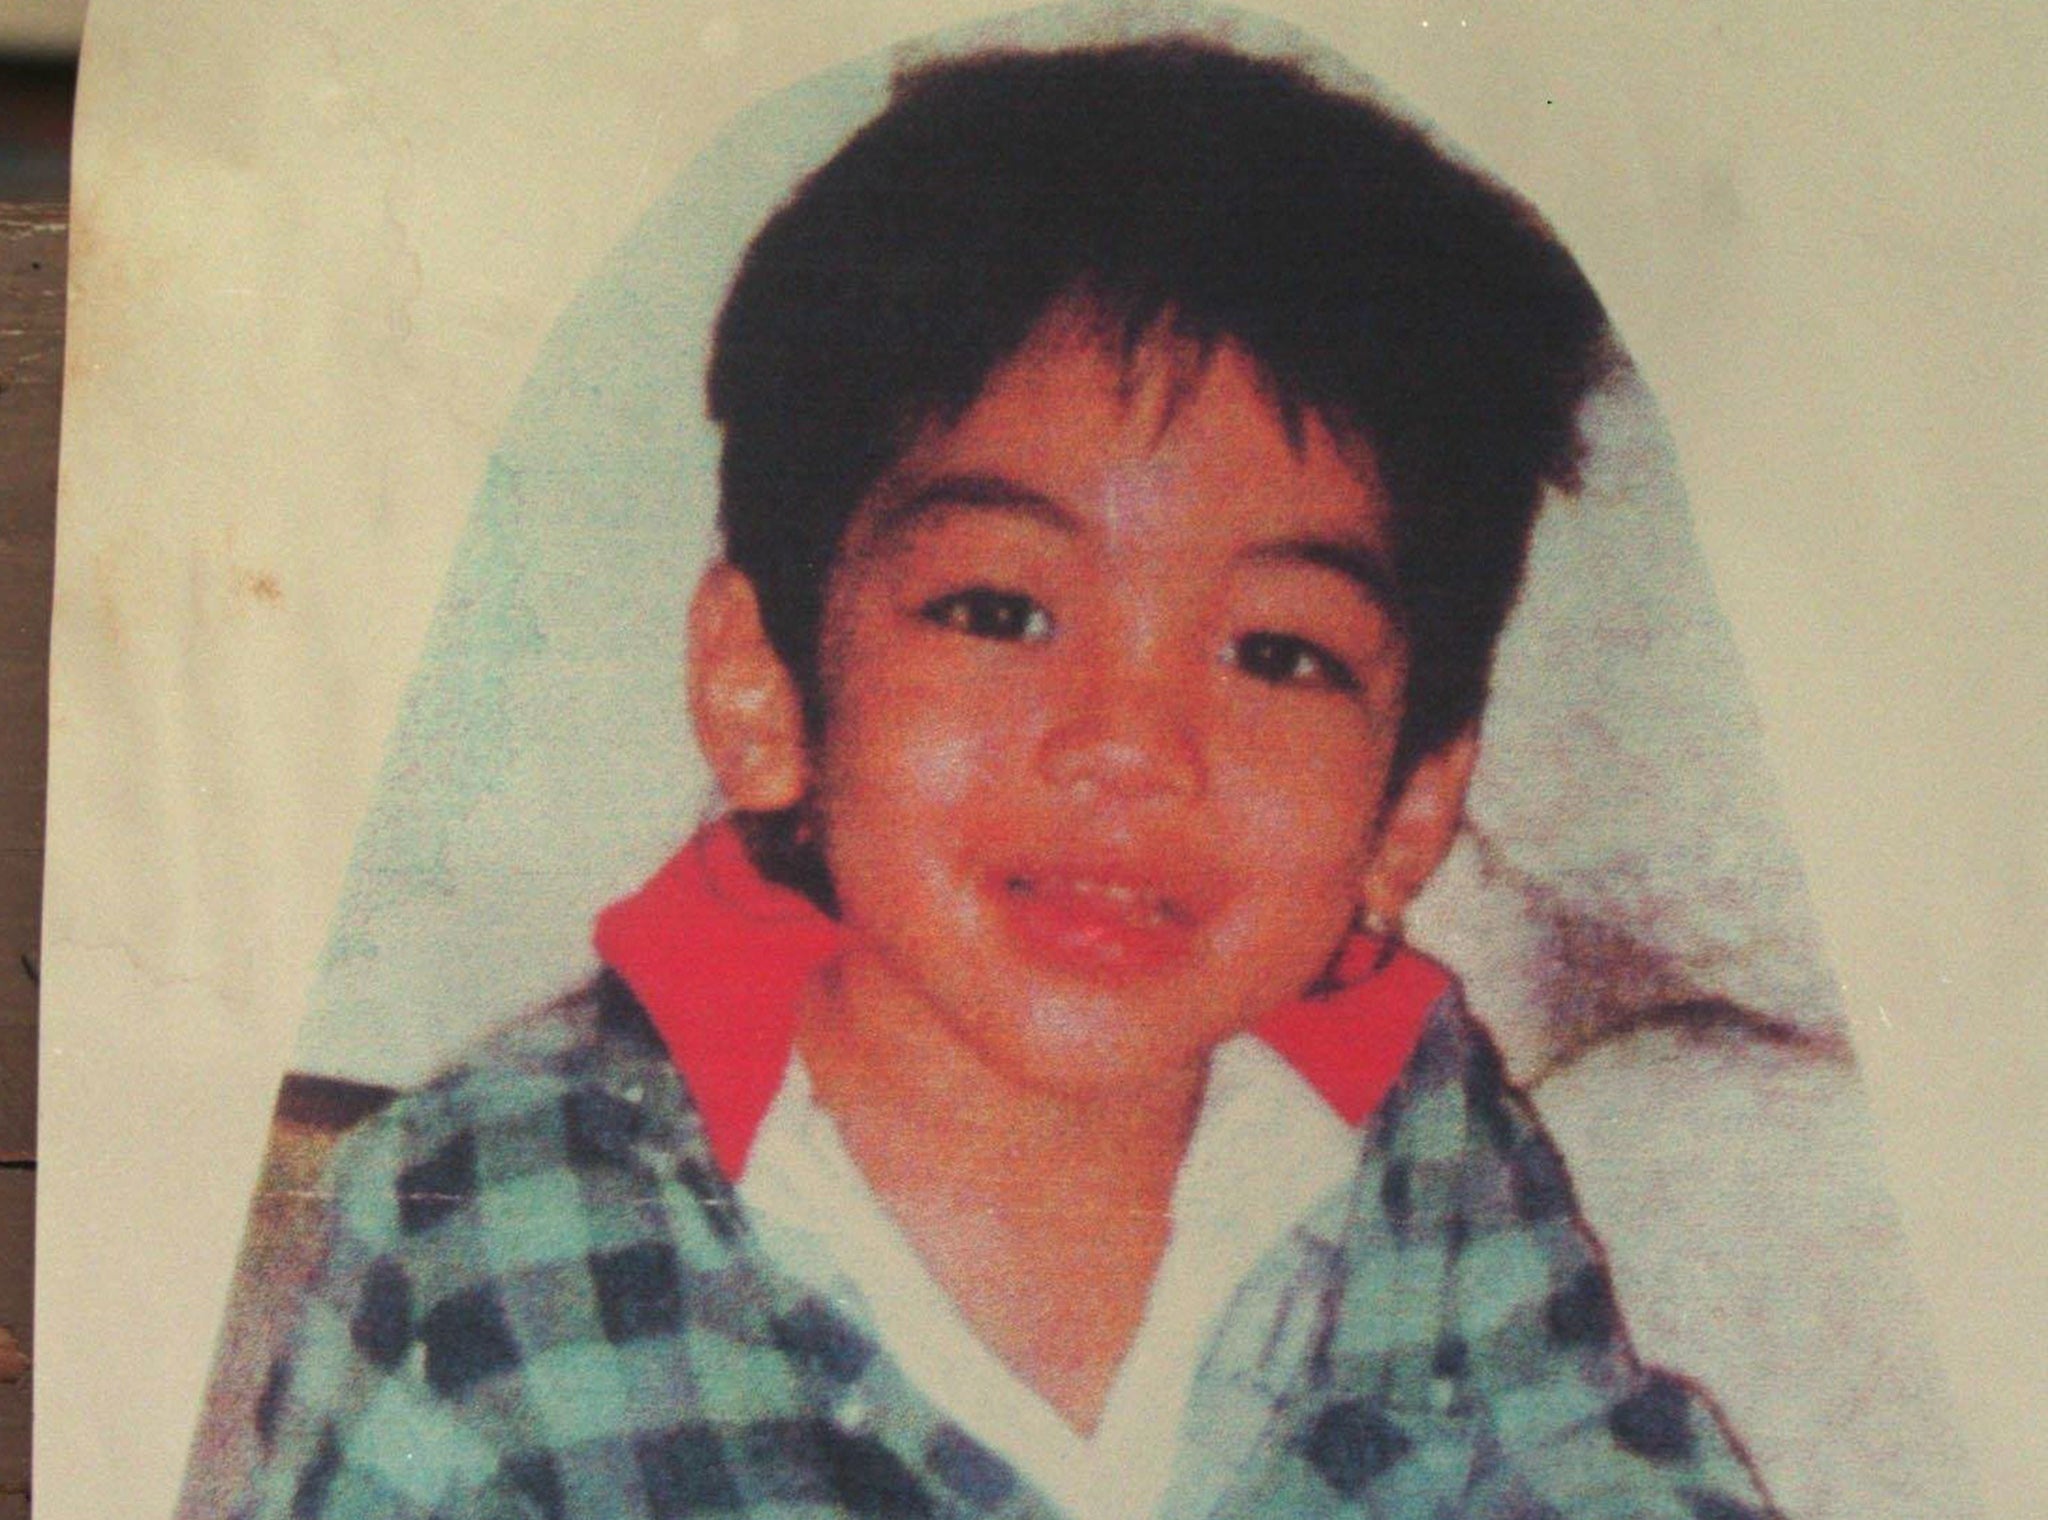 'Peter Boy' Kema went missing from his Hawaii home in 1997 and his body was never found